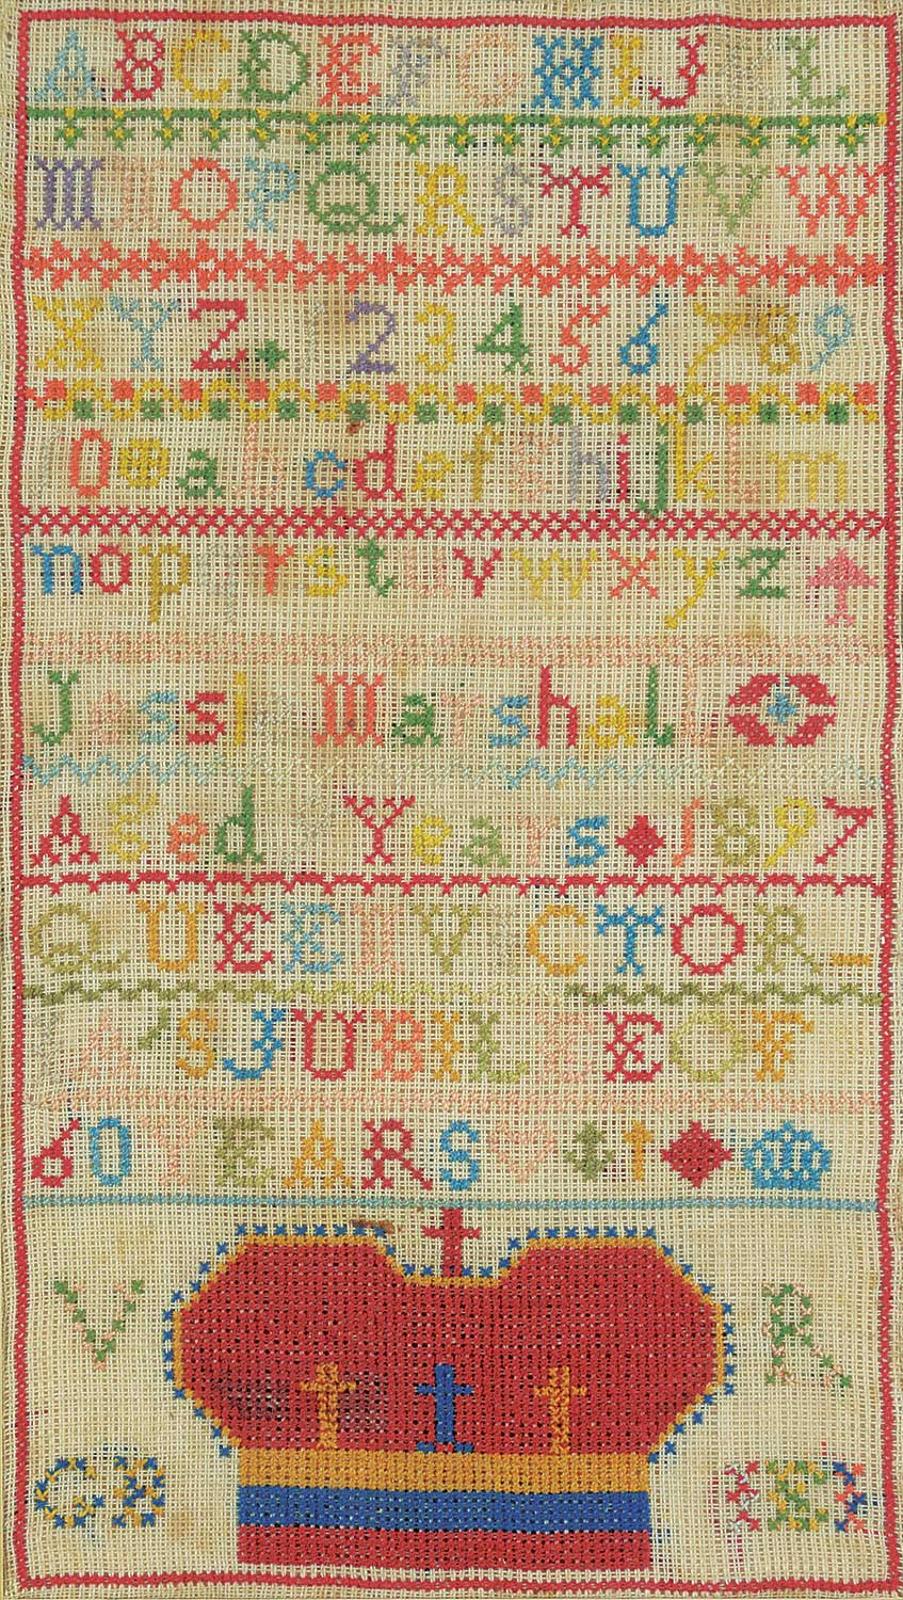 Sampler School - Jessie Marshall Aged Years 1897 Queen Victoria's Jubilee of 60 Years